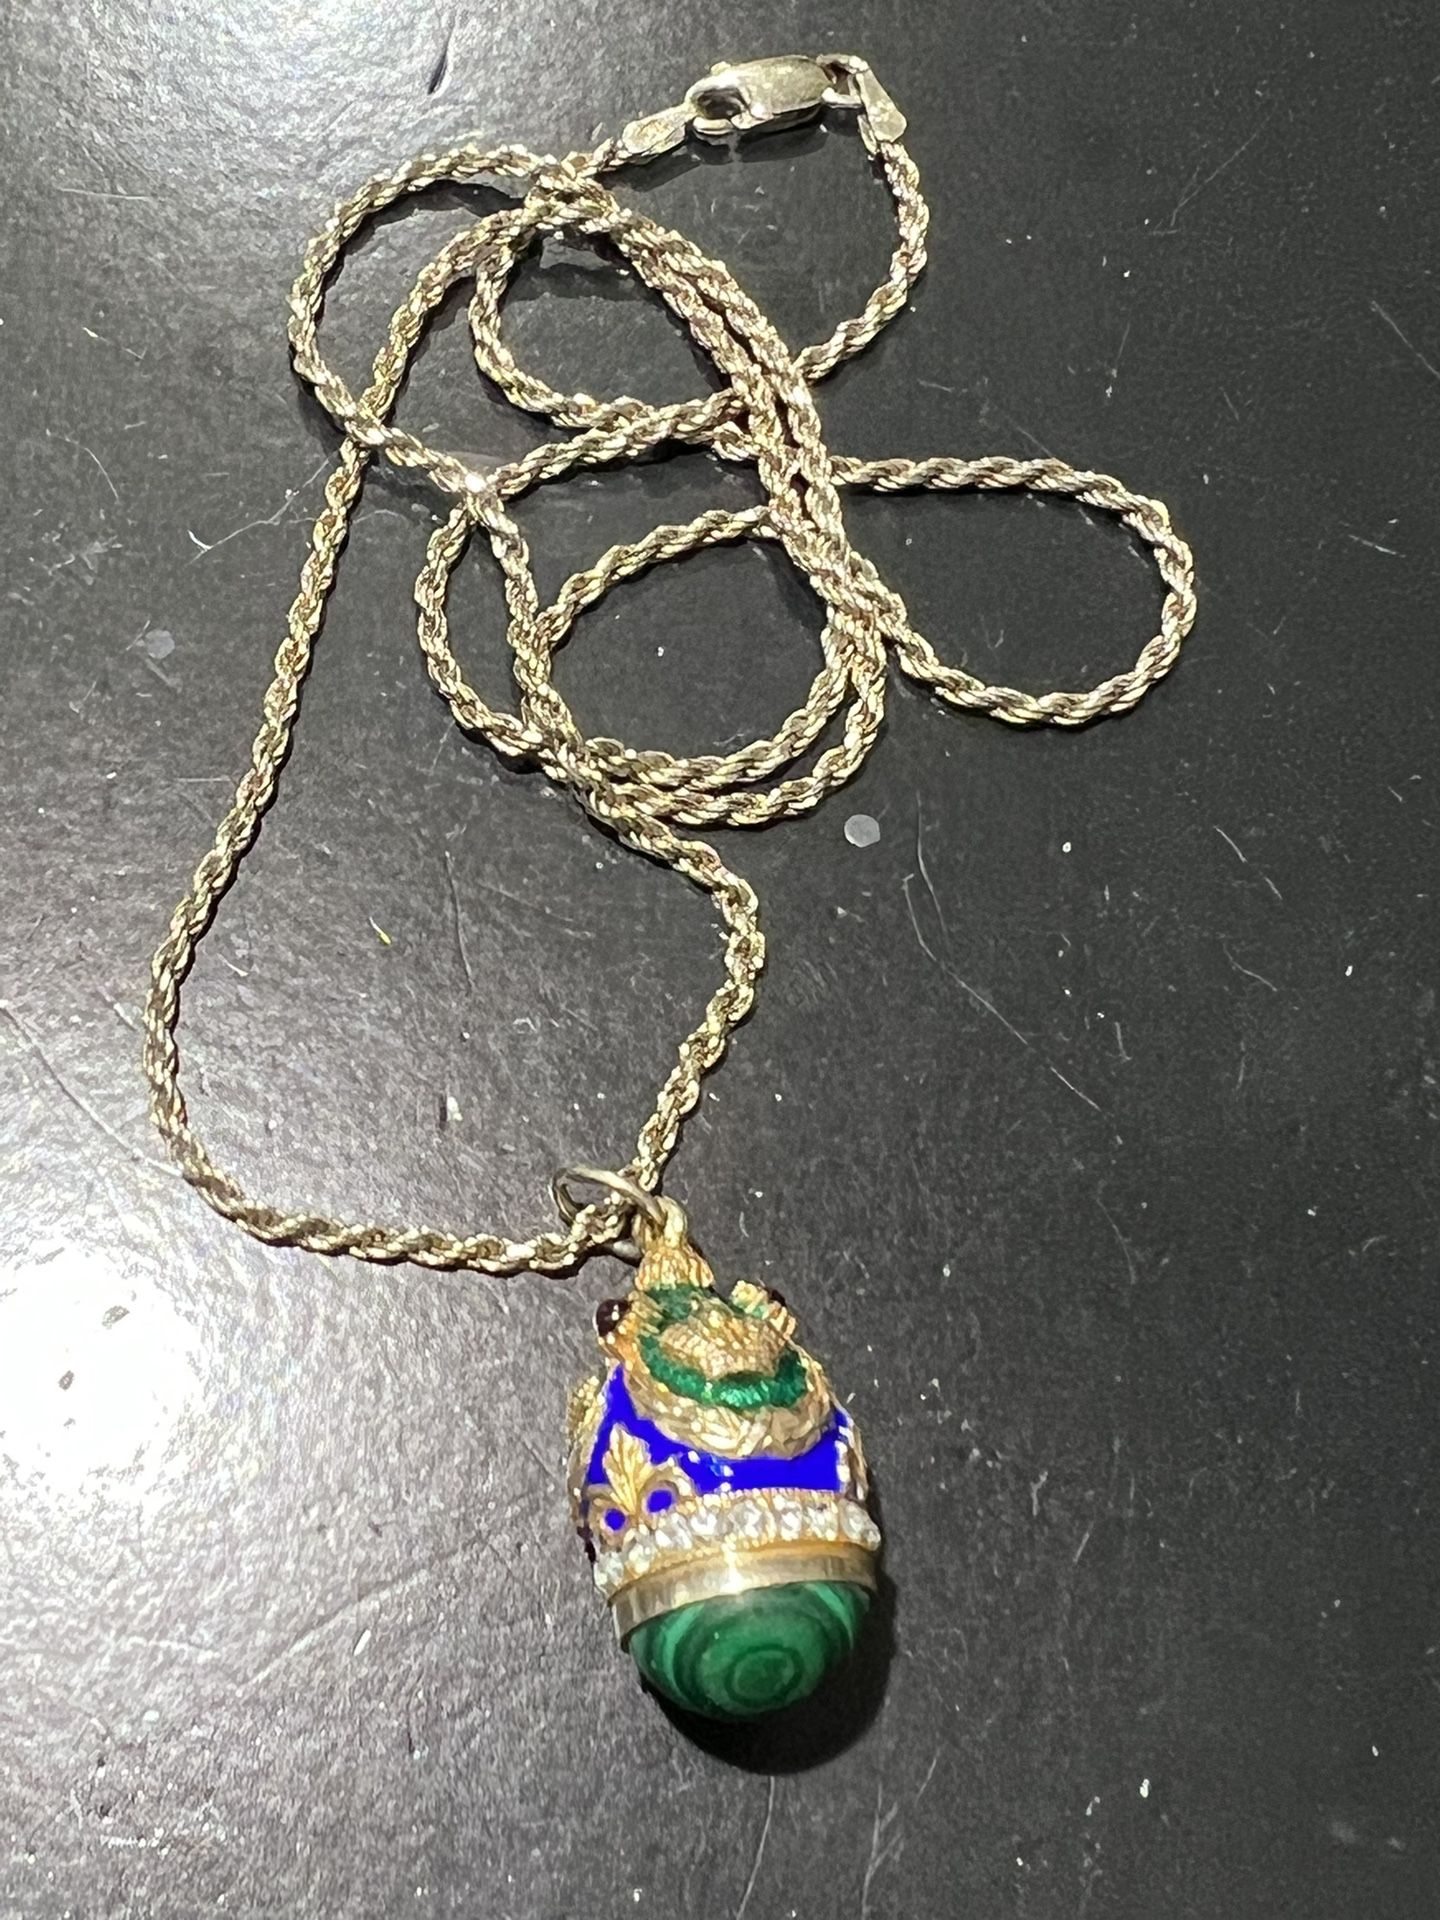 BEAUTIFUL STERLING SILVER FABERGE EGG PENDANT AND NECKLACE SIZE 20 